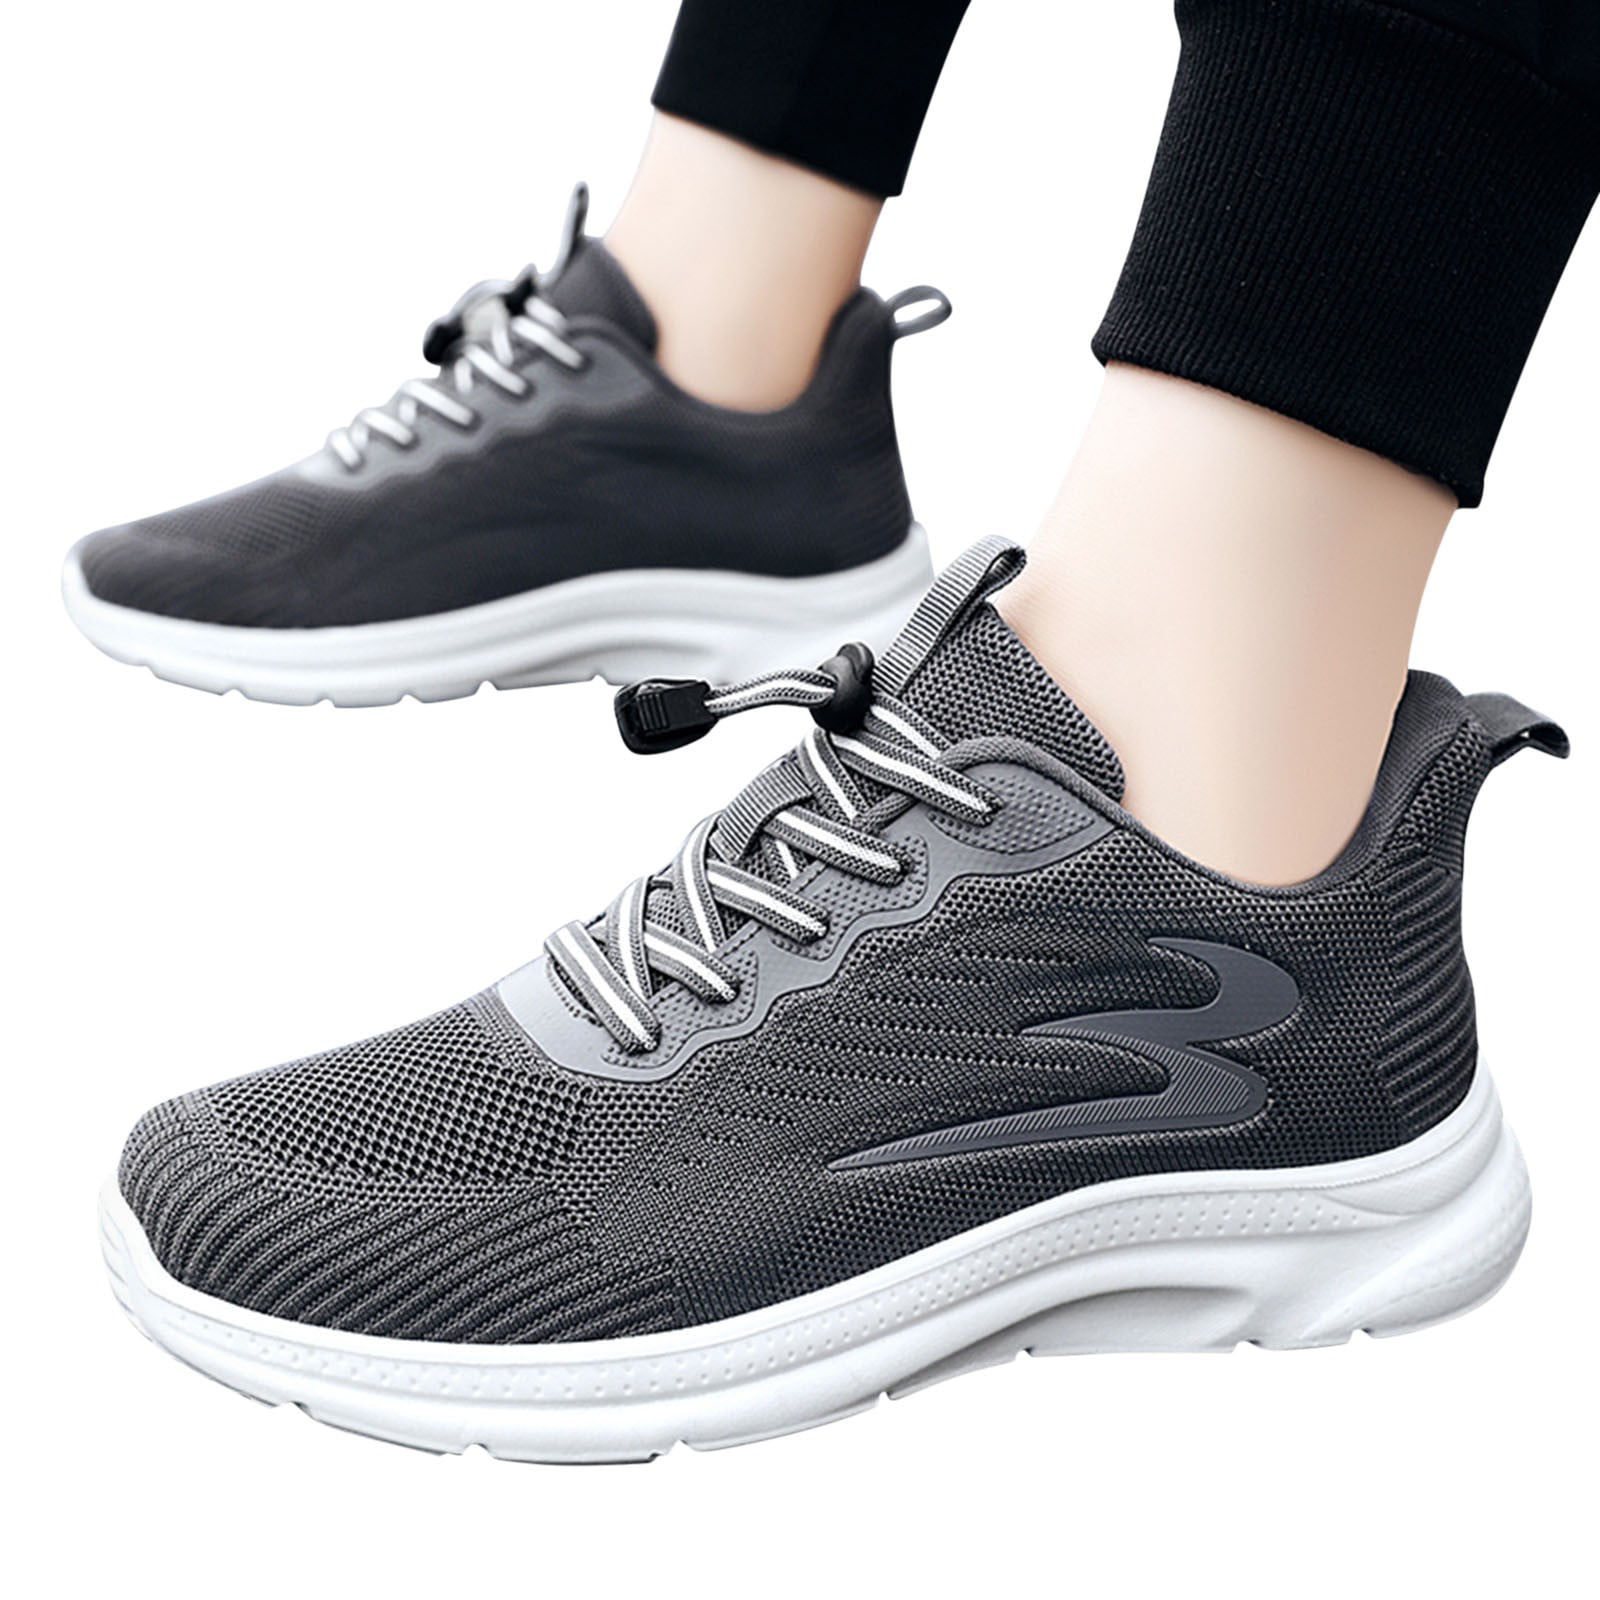 Gubotare Work Shoes For Men Mens Fashion Sneaker Stylish Running Shoes for  Casual Sports Athletic Walking Shoe,Gray 8 